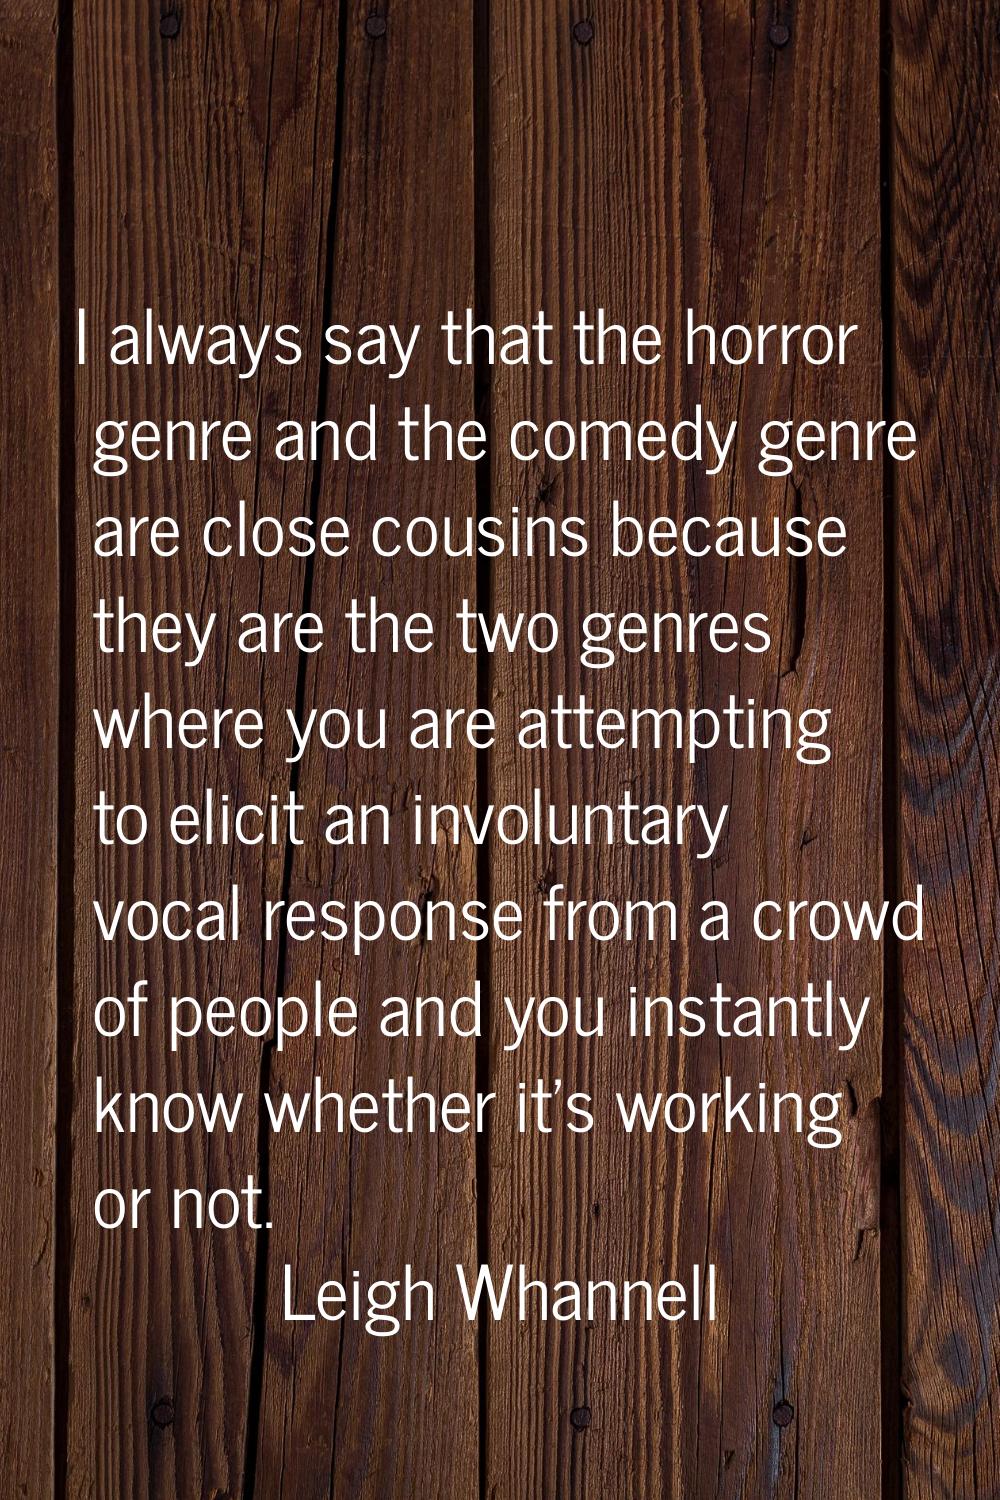 I always say that the horror genre and the comedy genre are close cousins because they are the two 